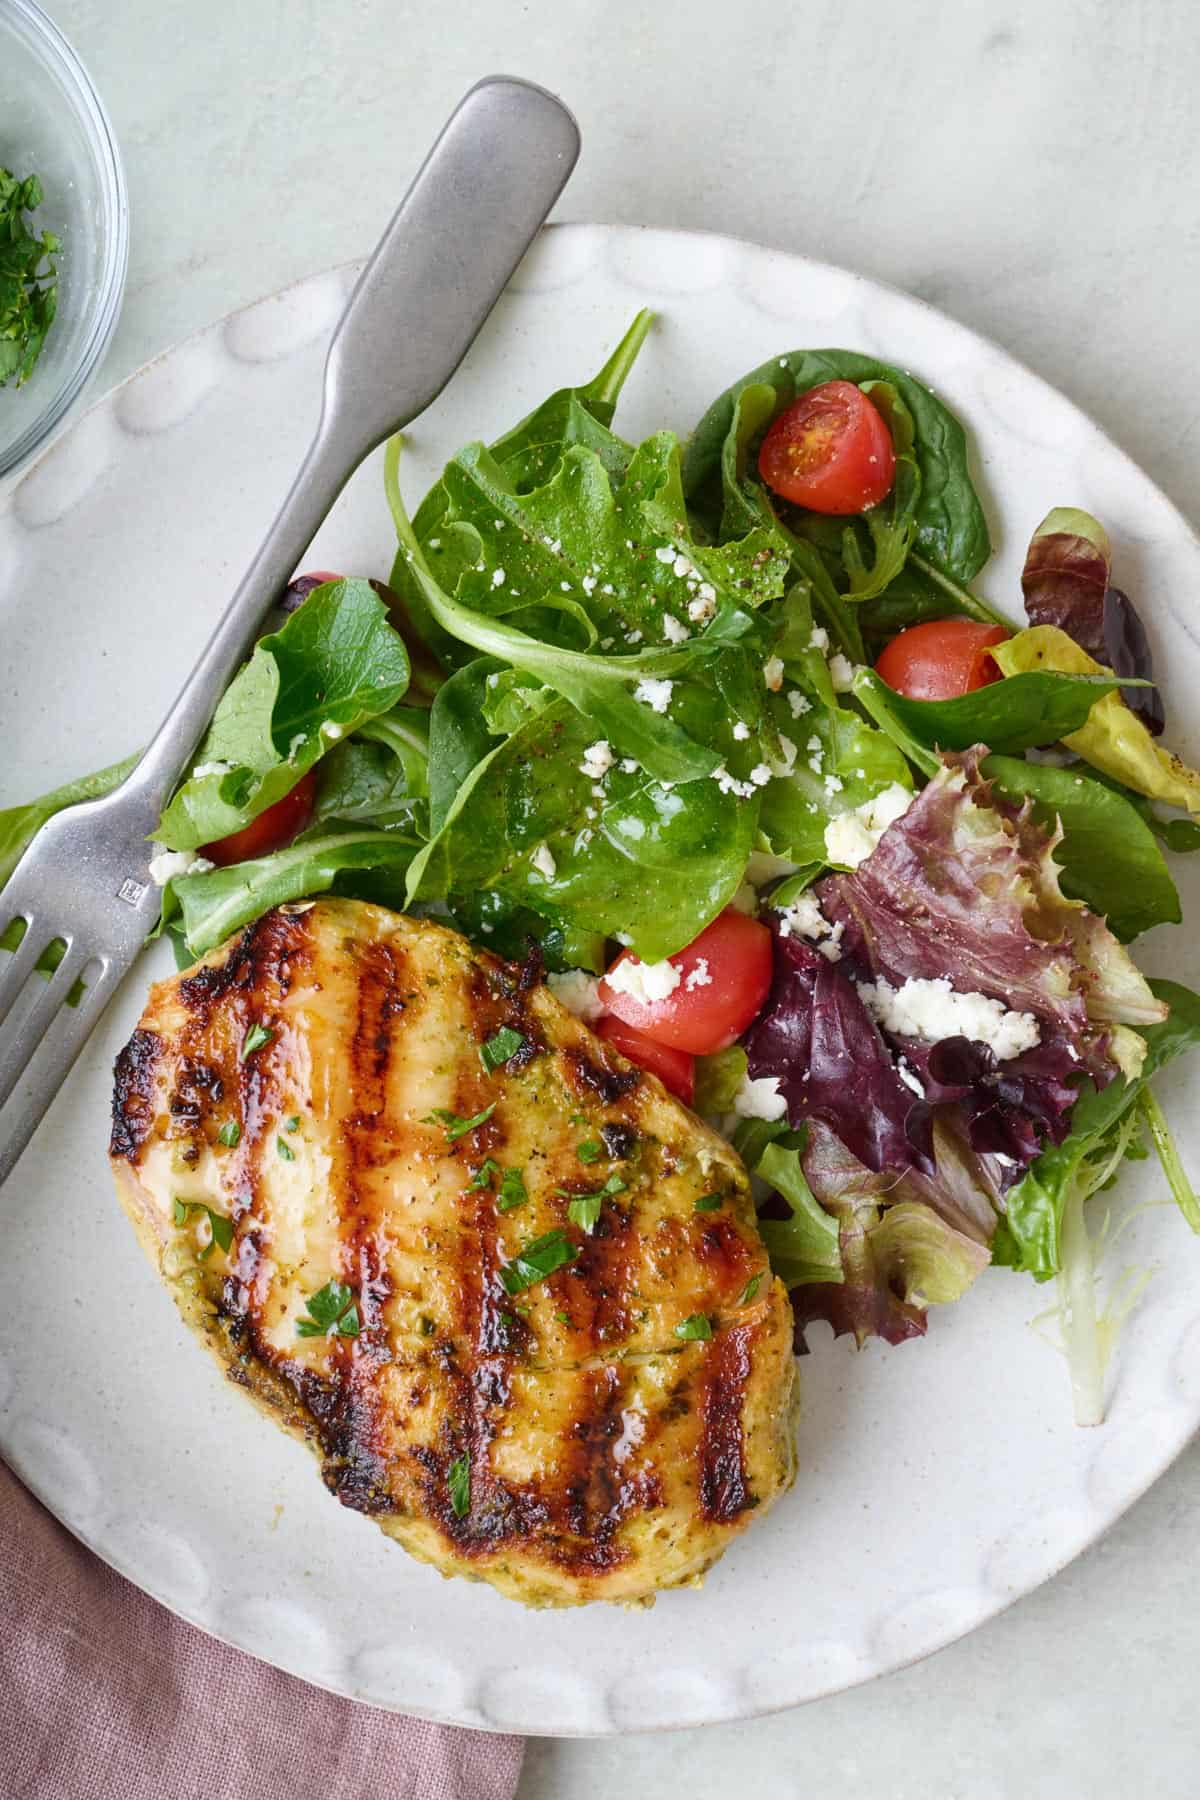 Pesto yogurt grilled chicken breast on a plate with a fresh spring salad.